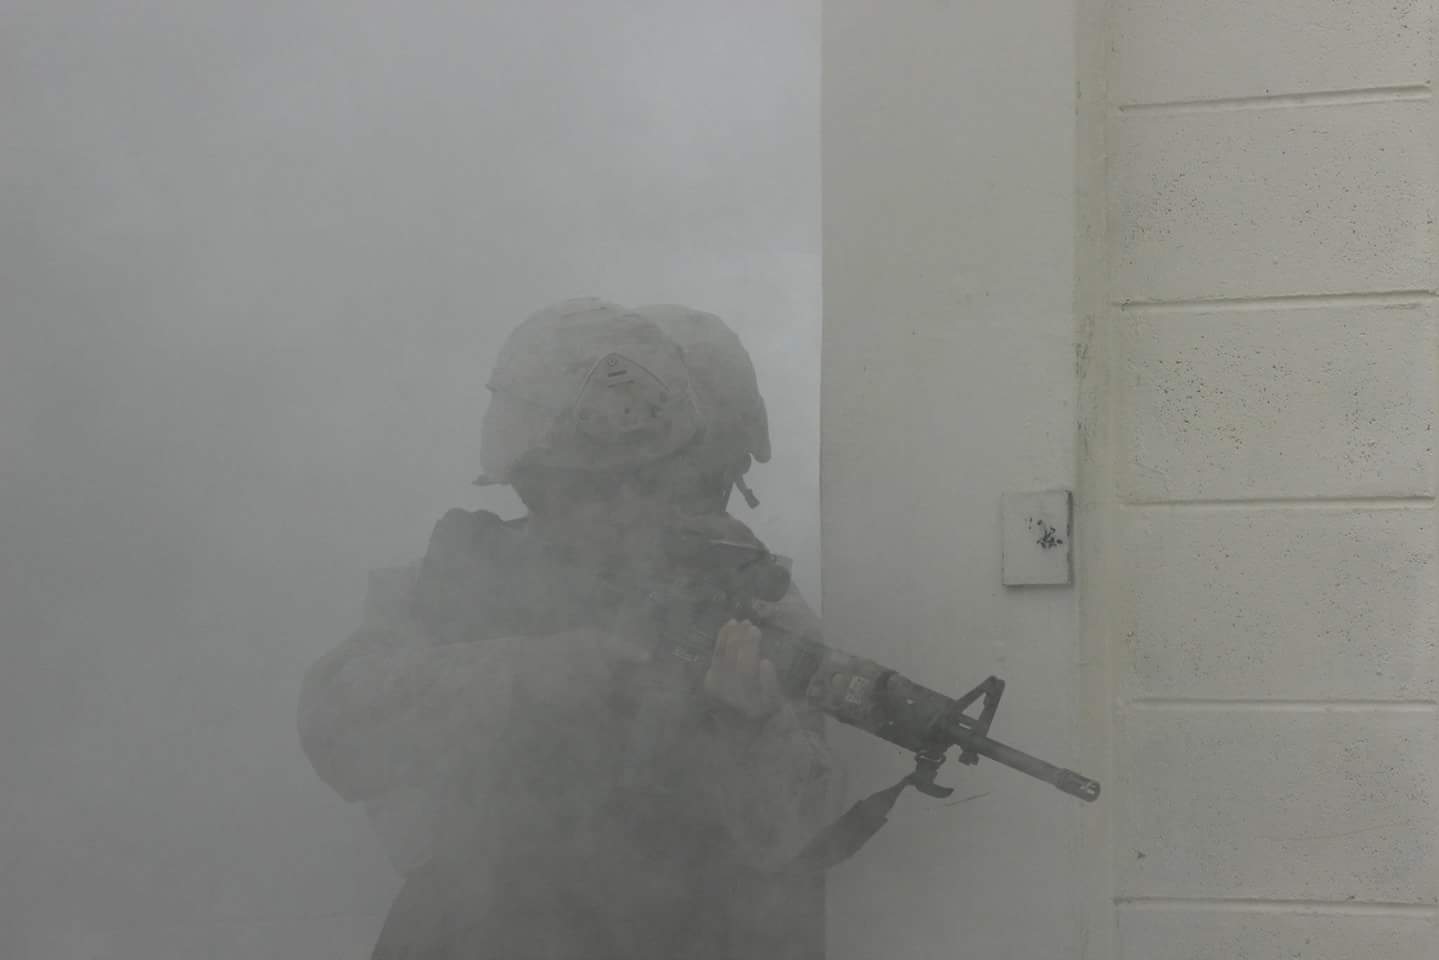 A soldier in the fog holding his rifle.